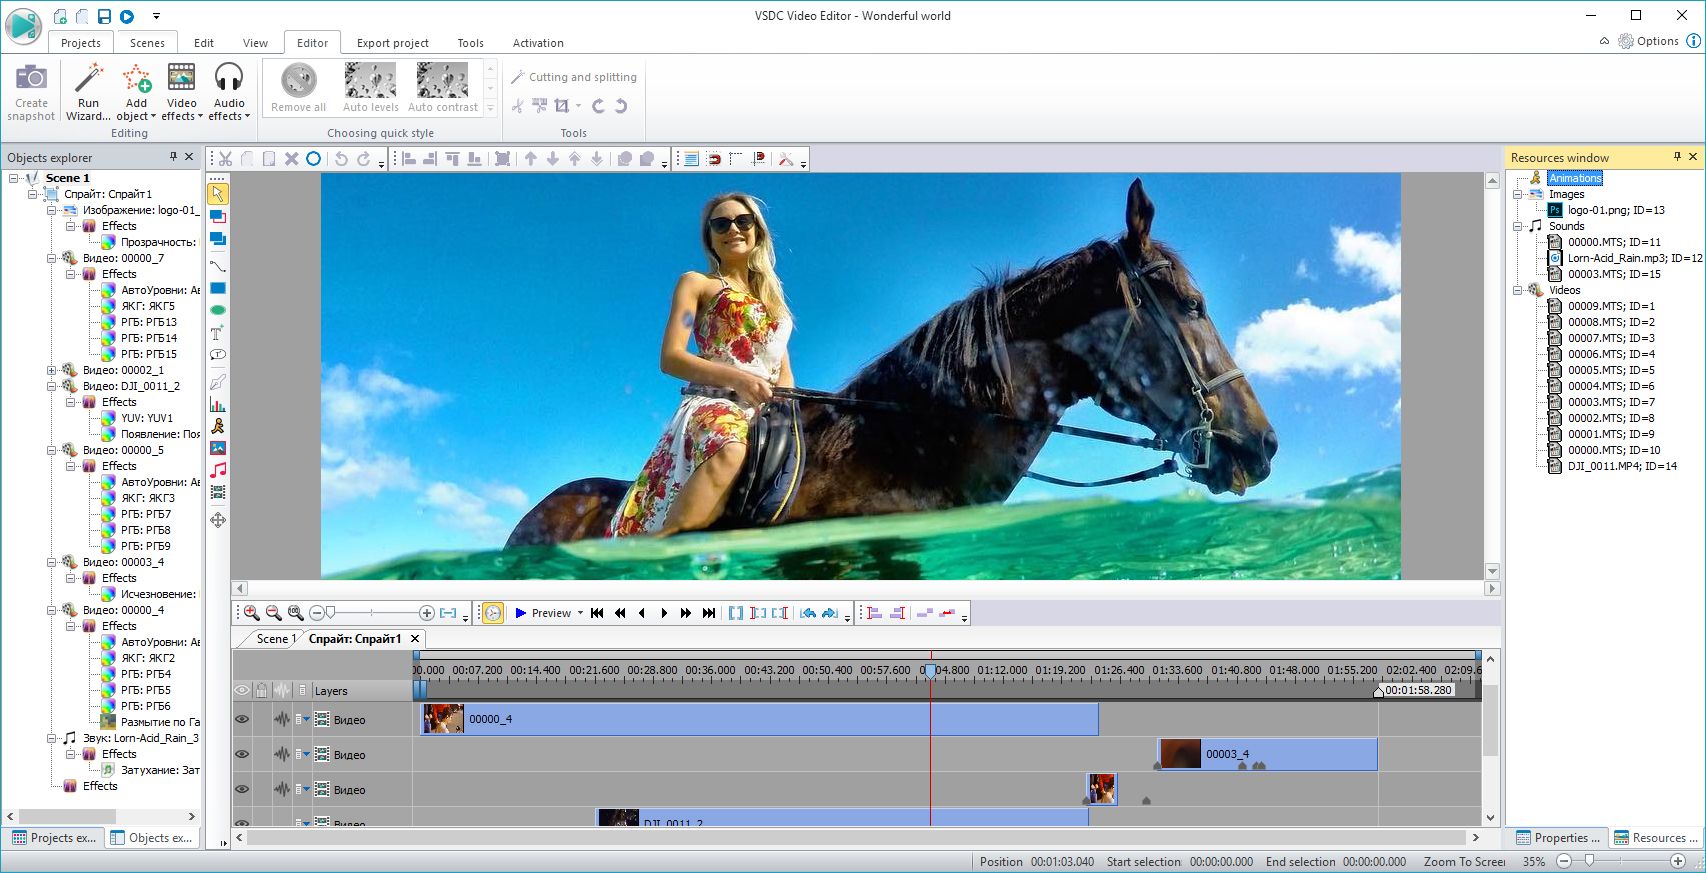 The best free video editing software: VSDC